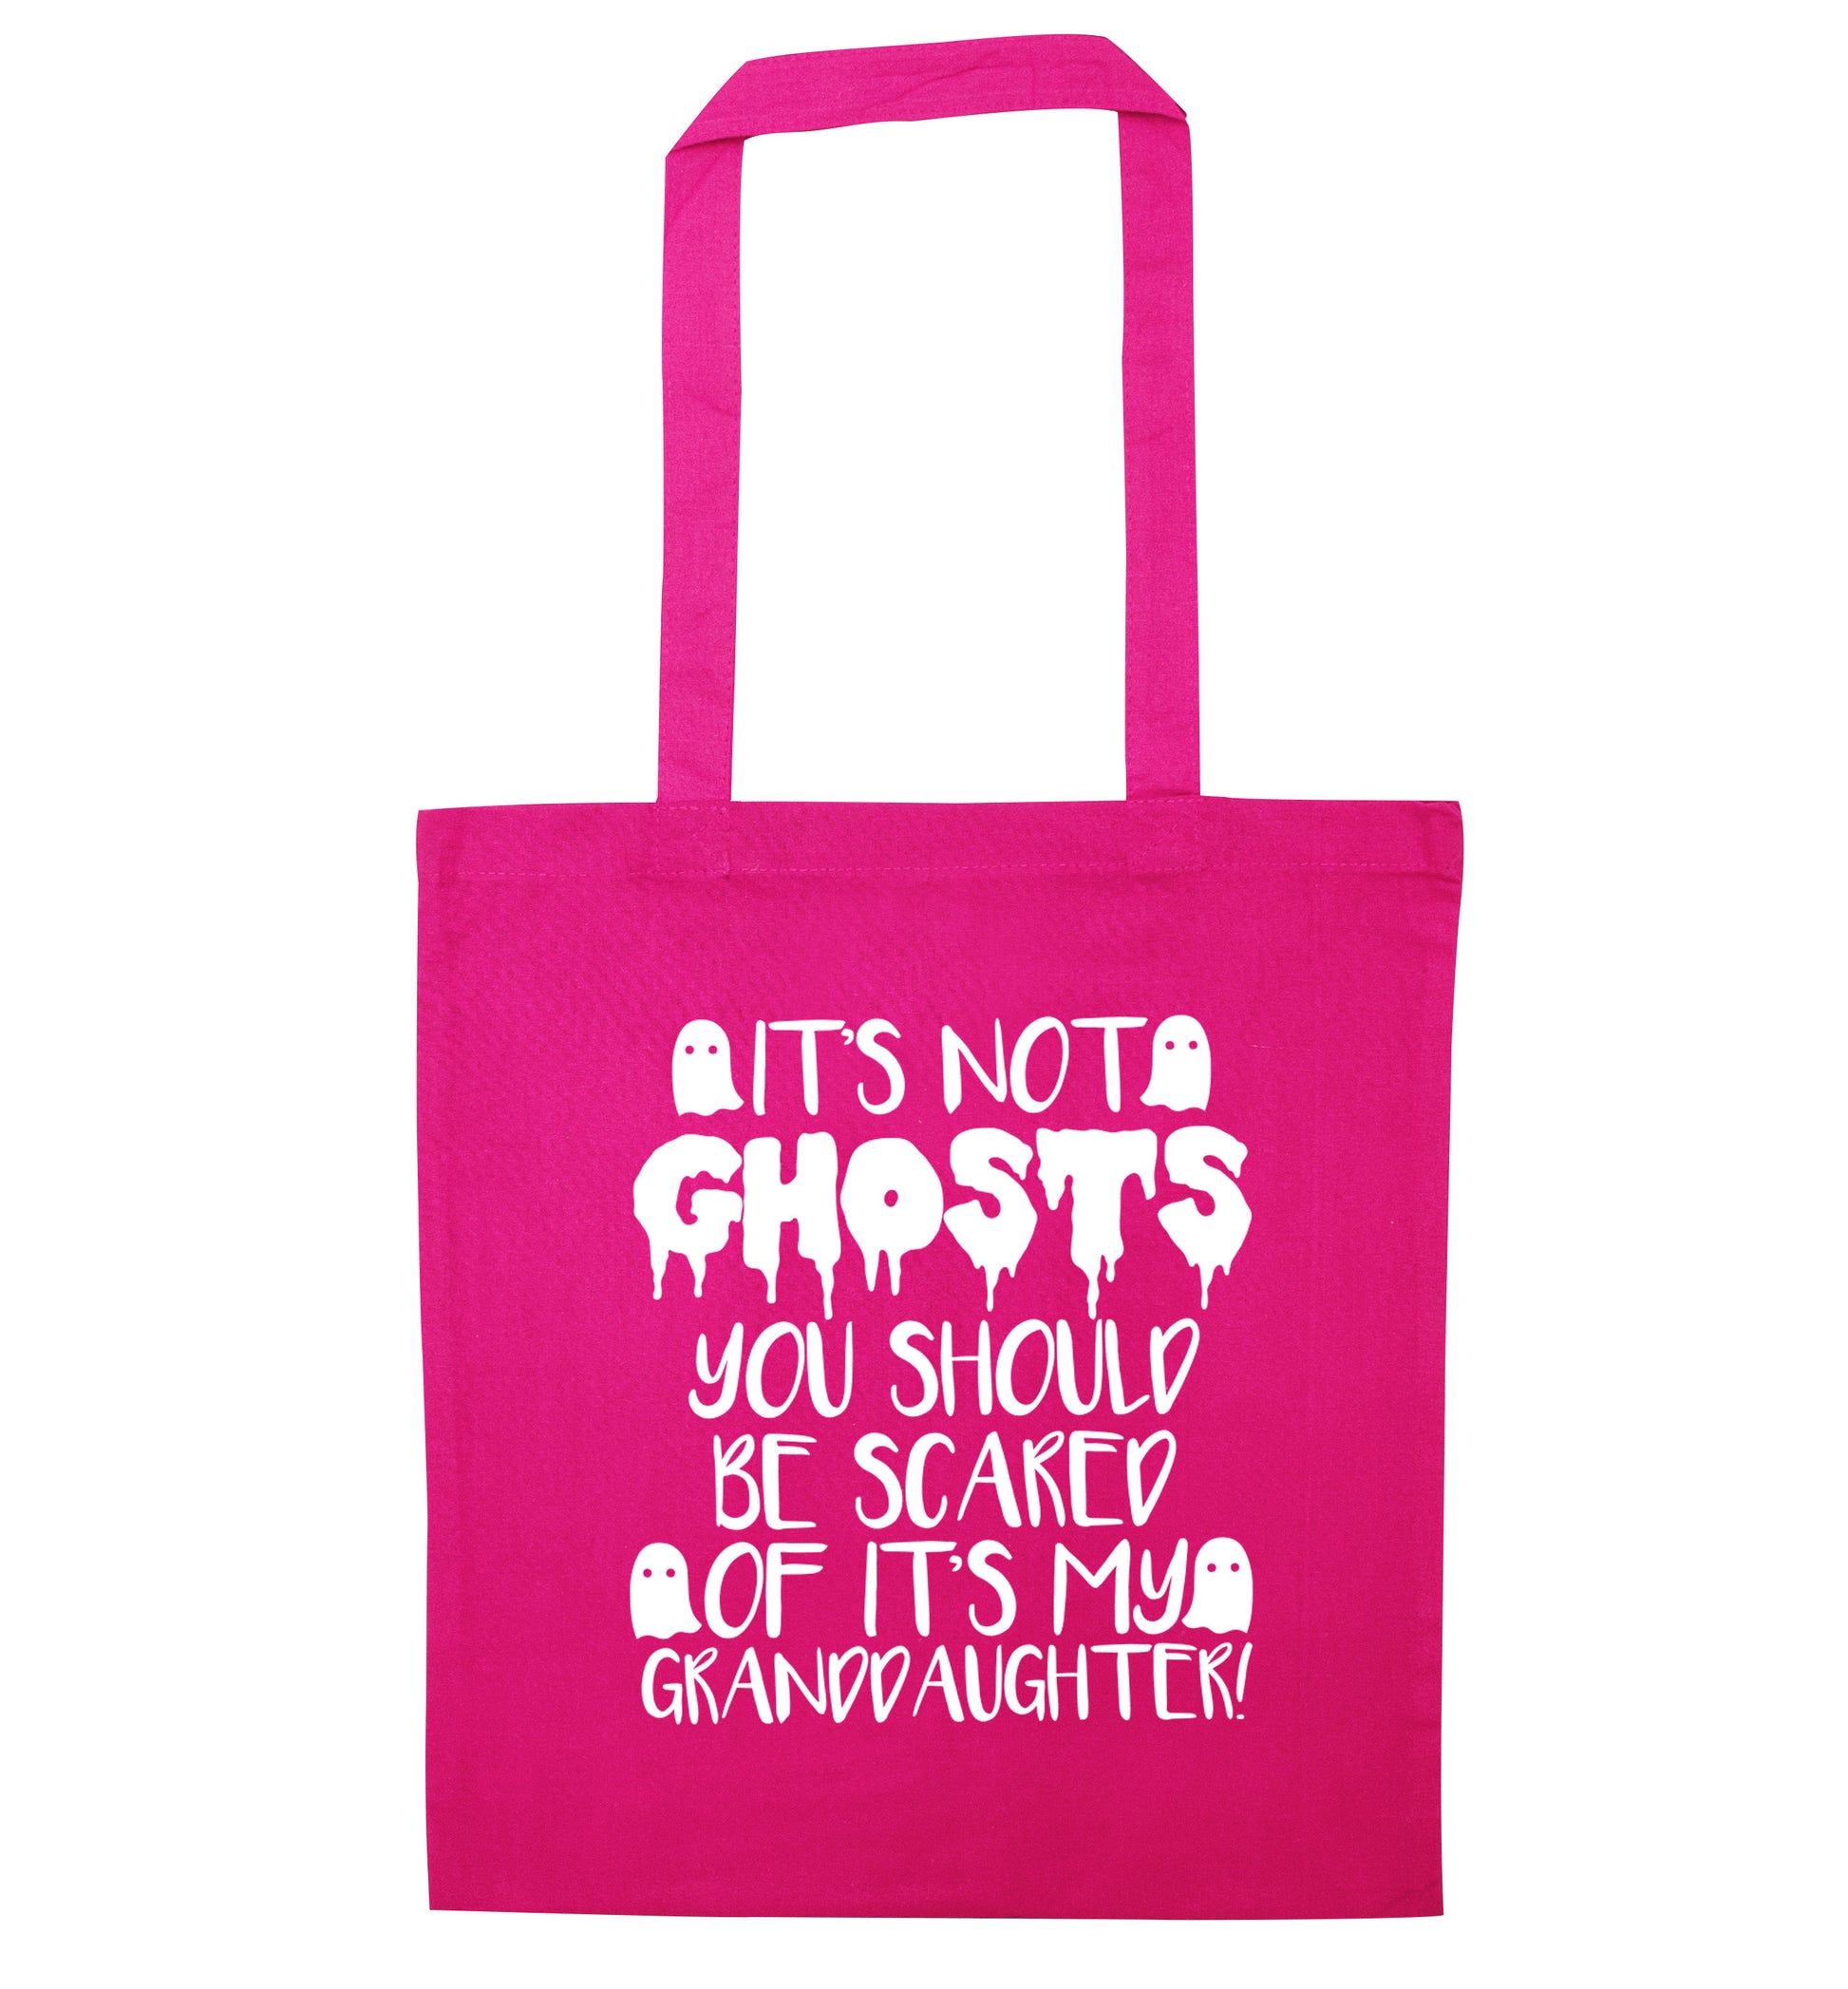 It's not ghosts you should be scared of it's my granddaughter! pink tote bag